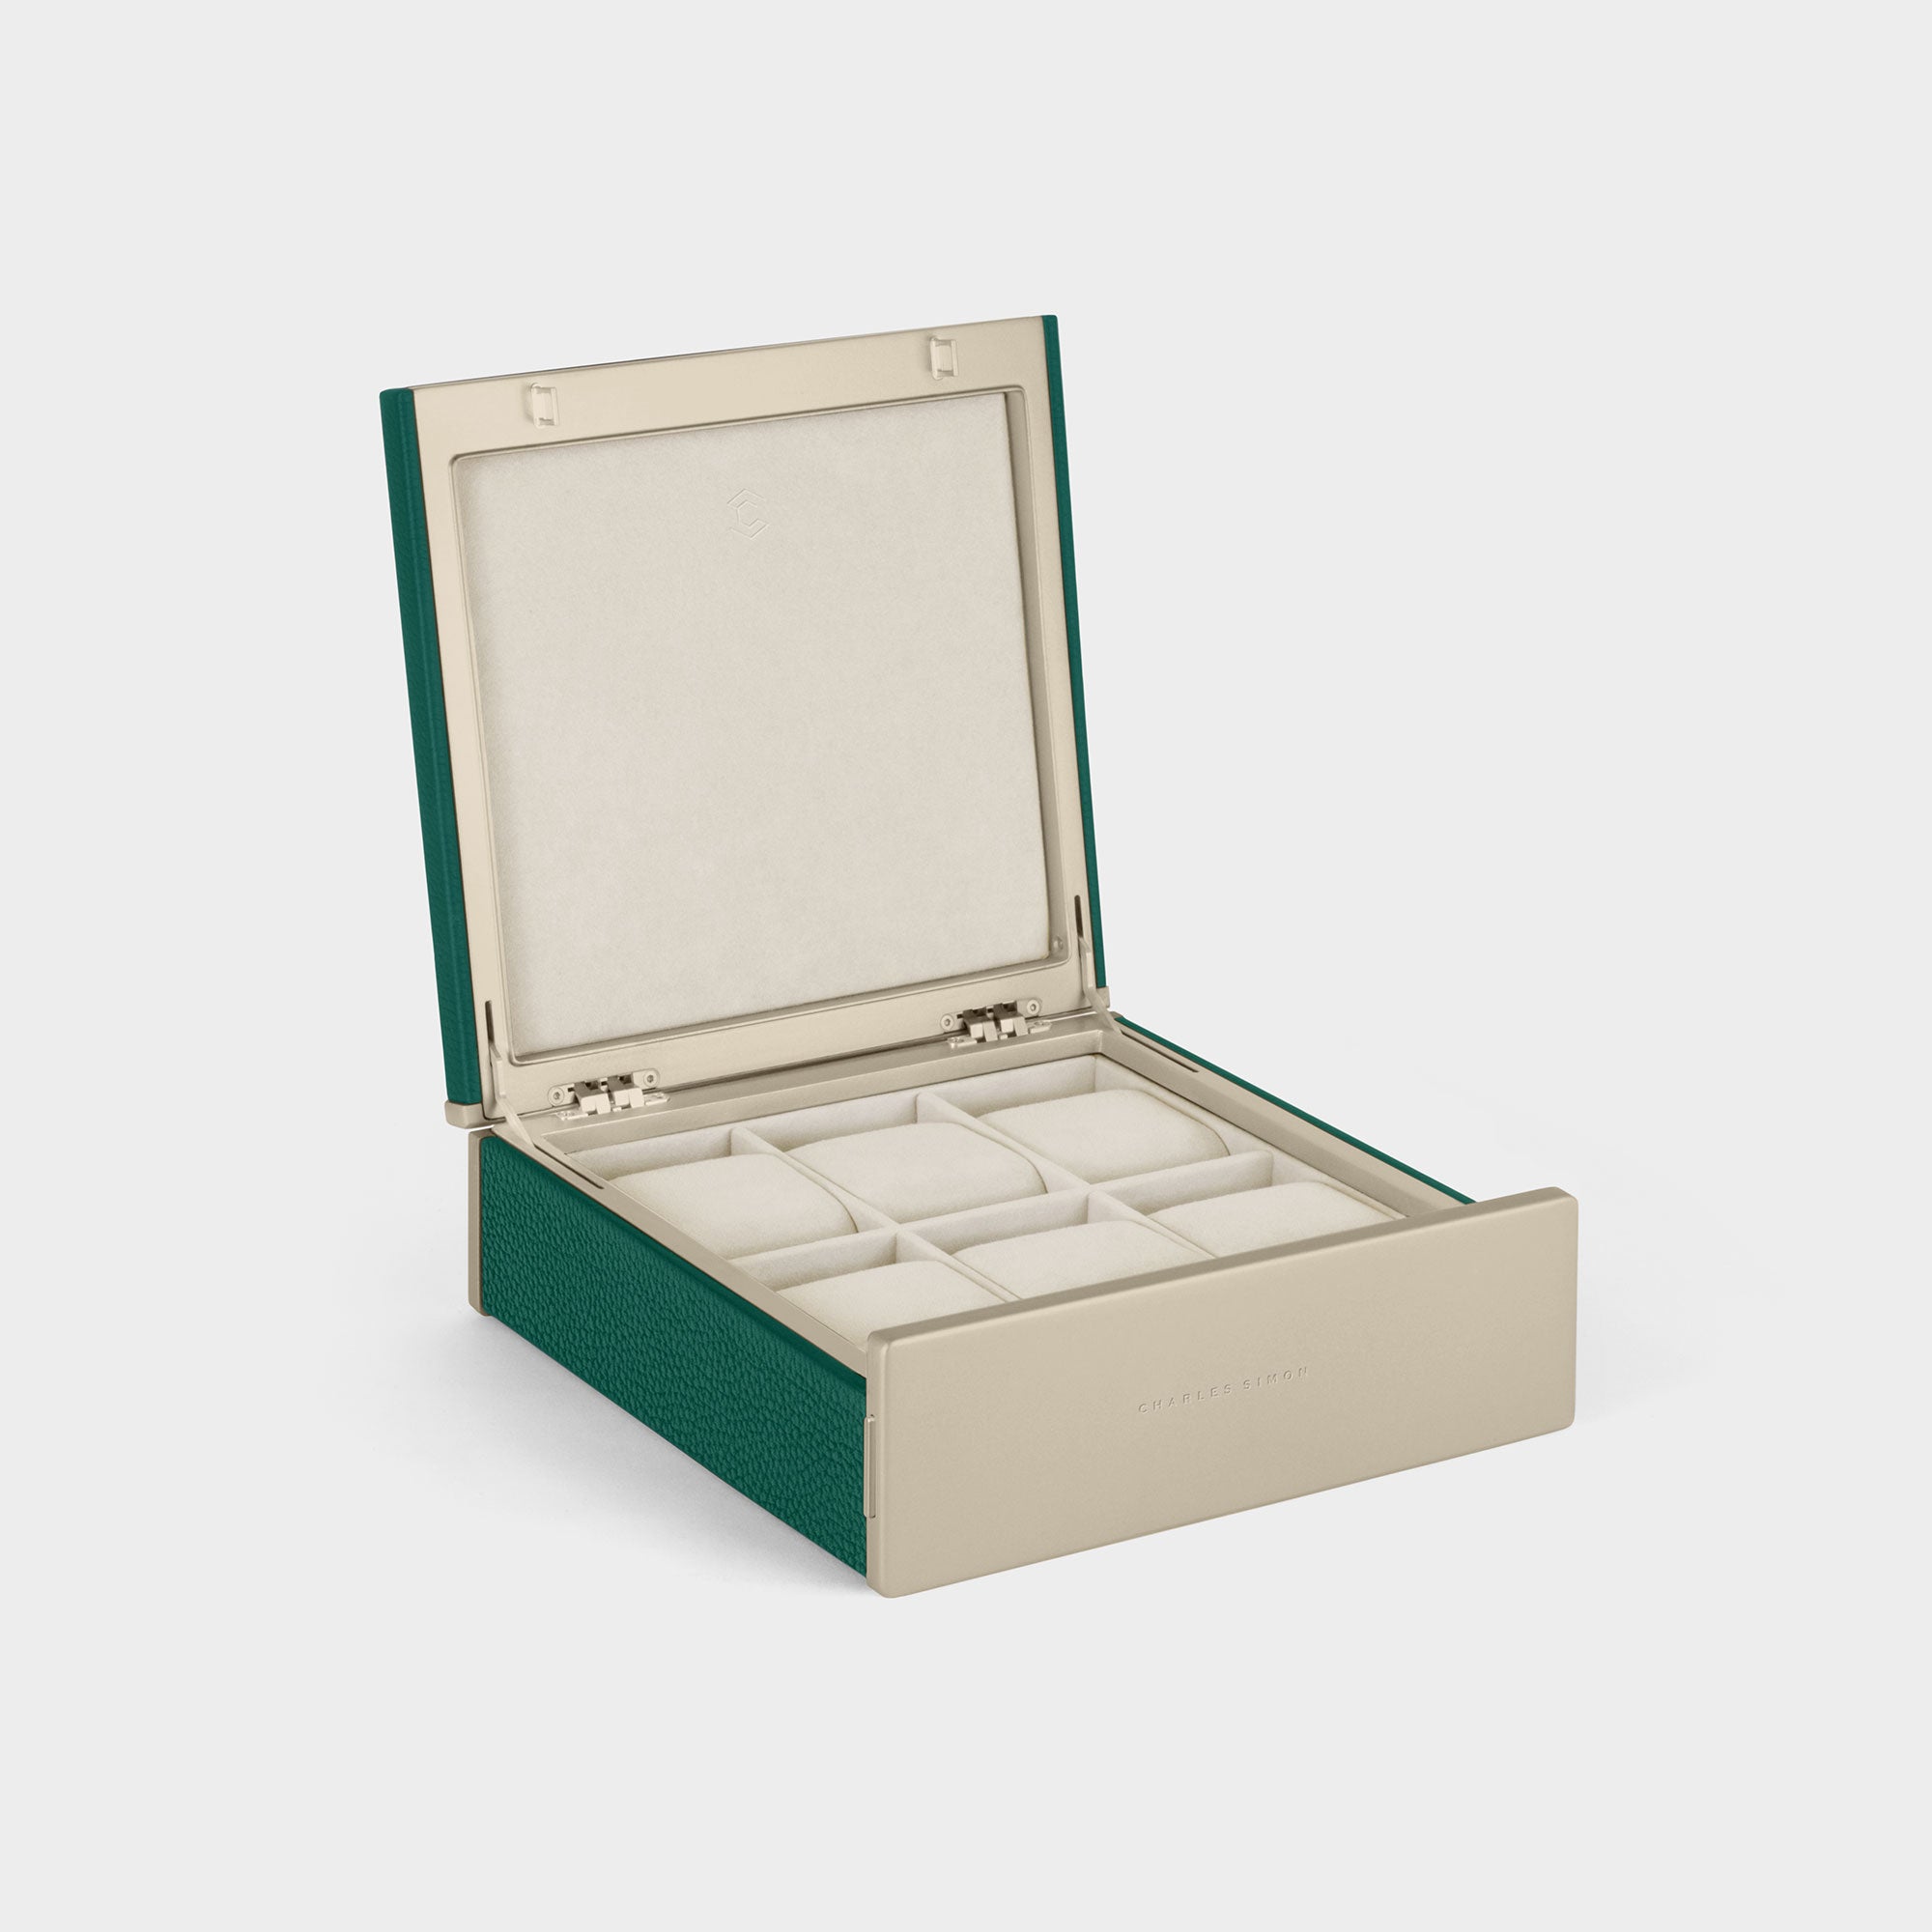 Product photo of open Spence 6 Watch box featuring gold accents, emerald leather and eggshell removable watch cushions for up to 6 watches